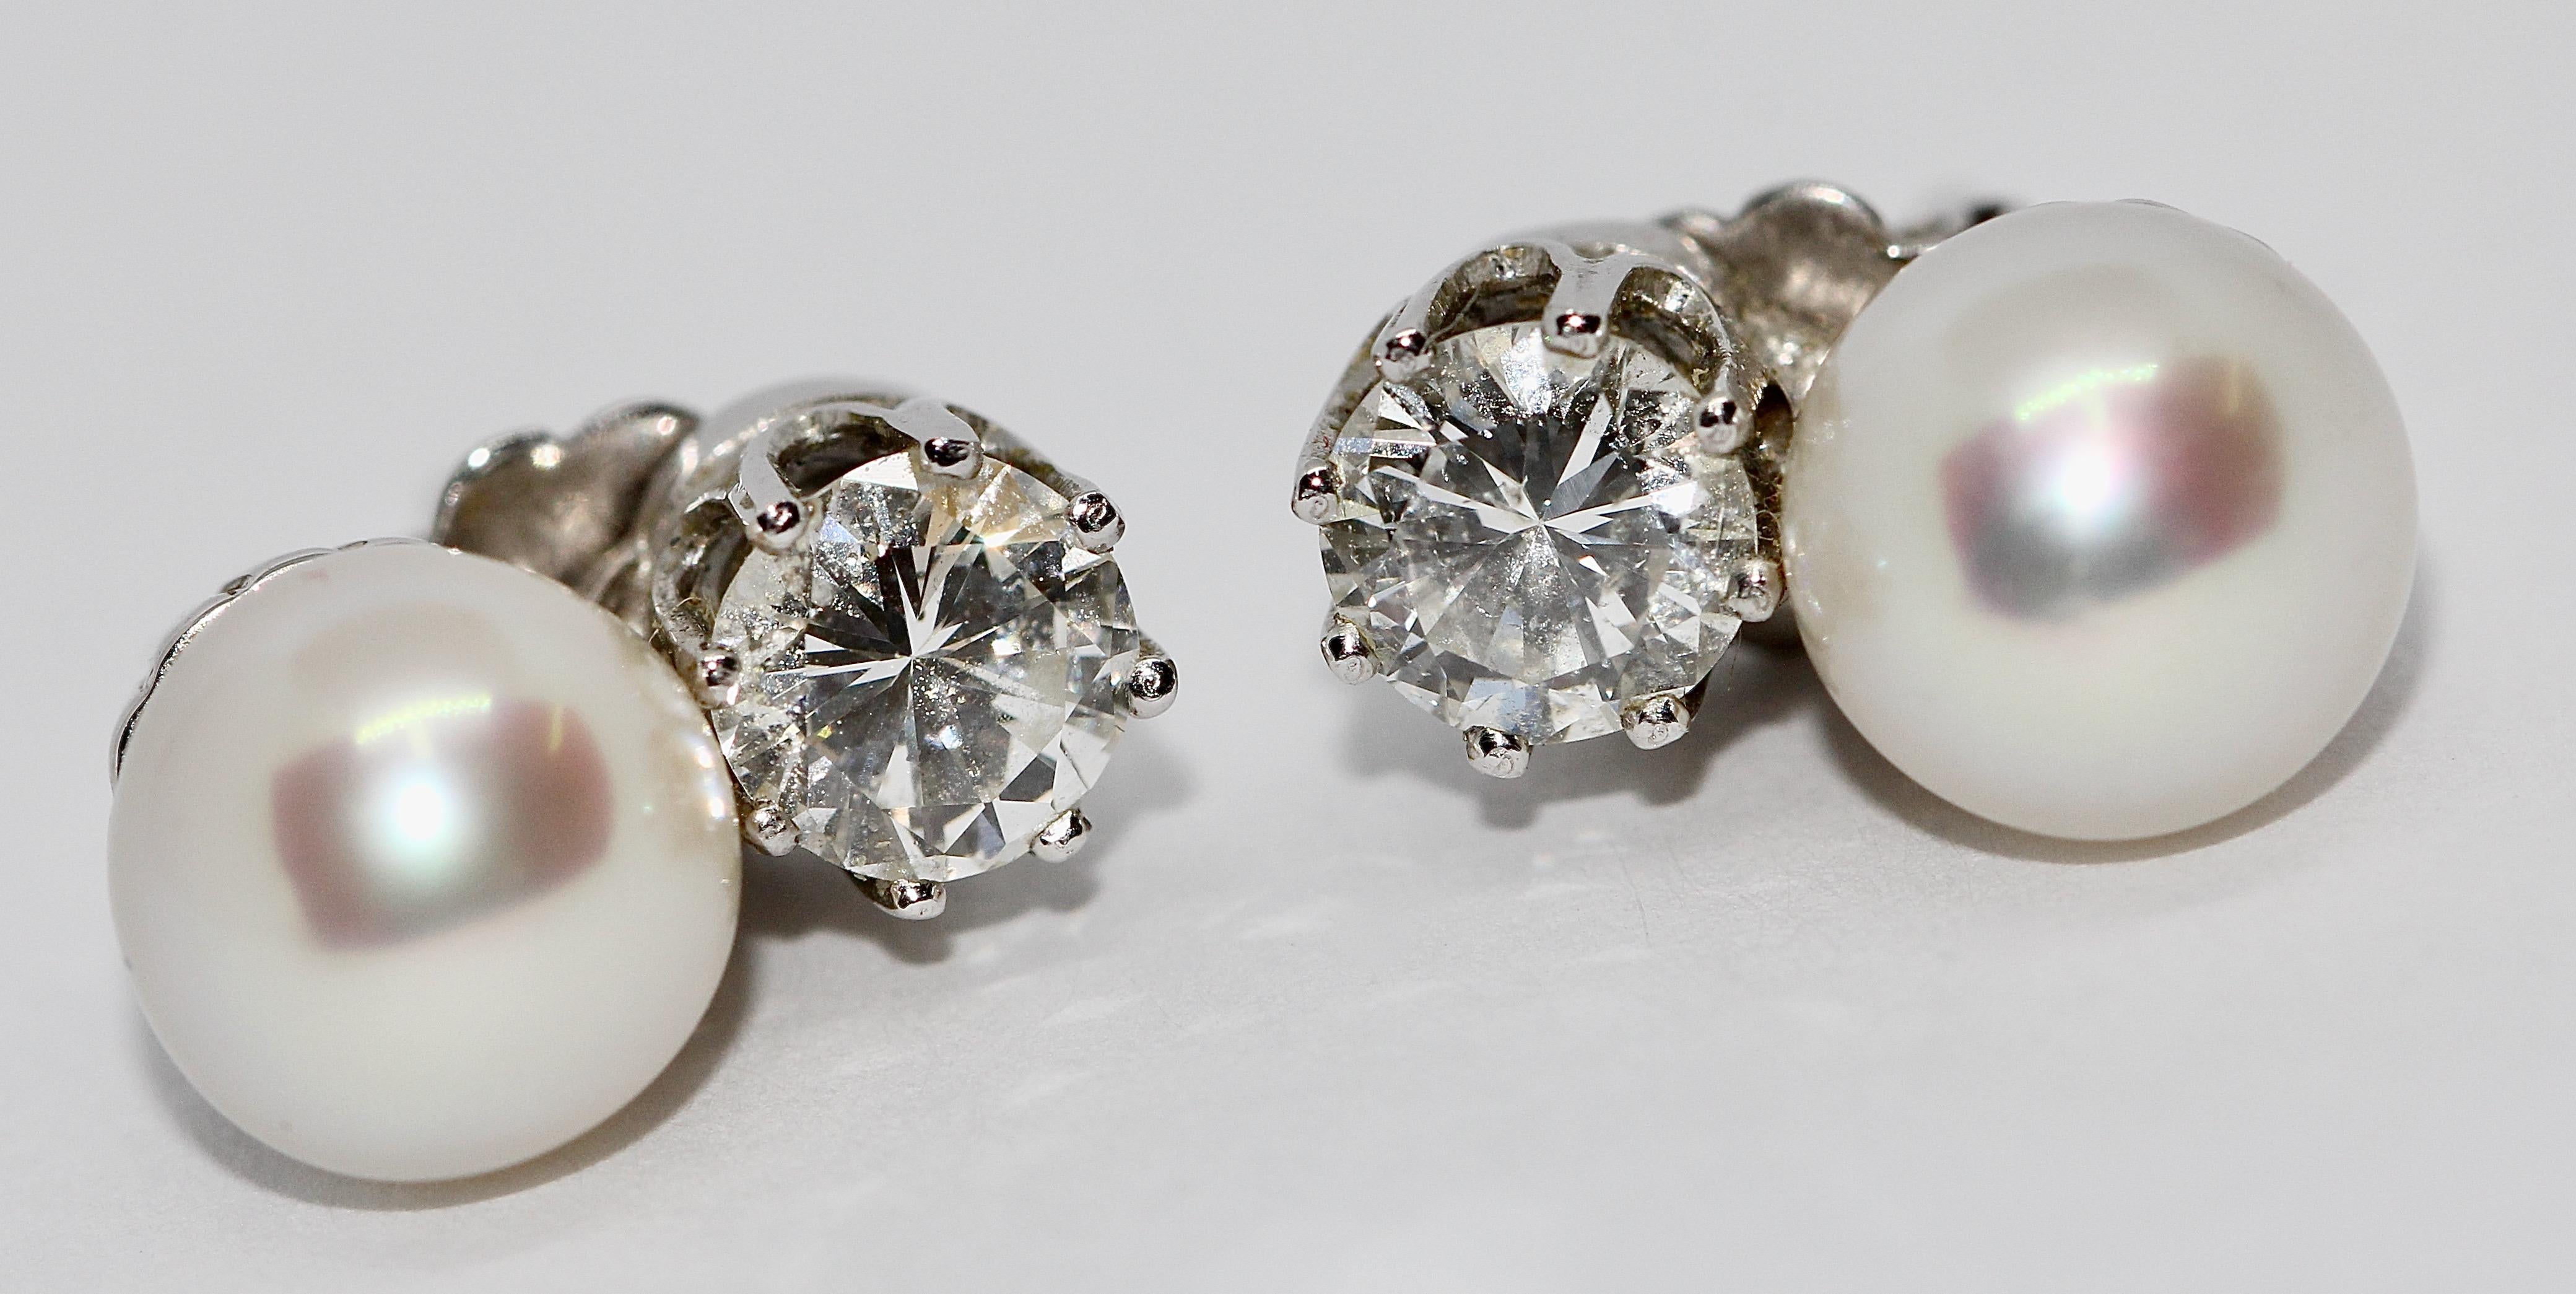 White gold ladies diamond stud earrings with pearls.

Diamond approx.0.53 carat each.

Including certificate of authenticity.